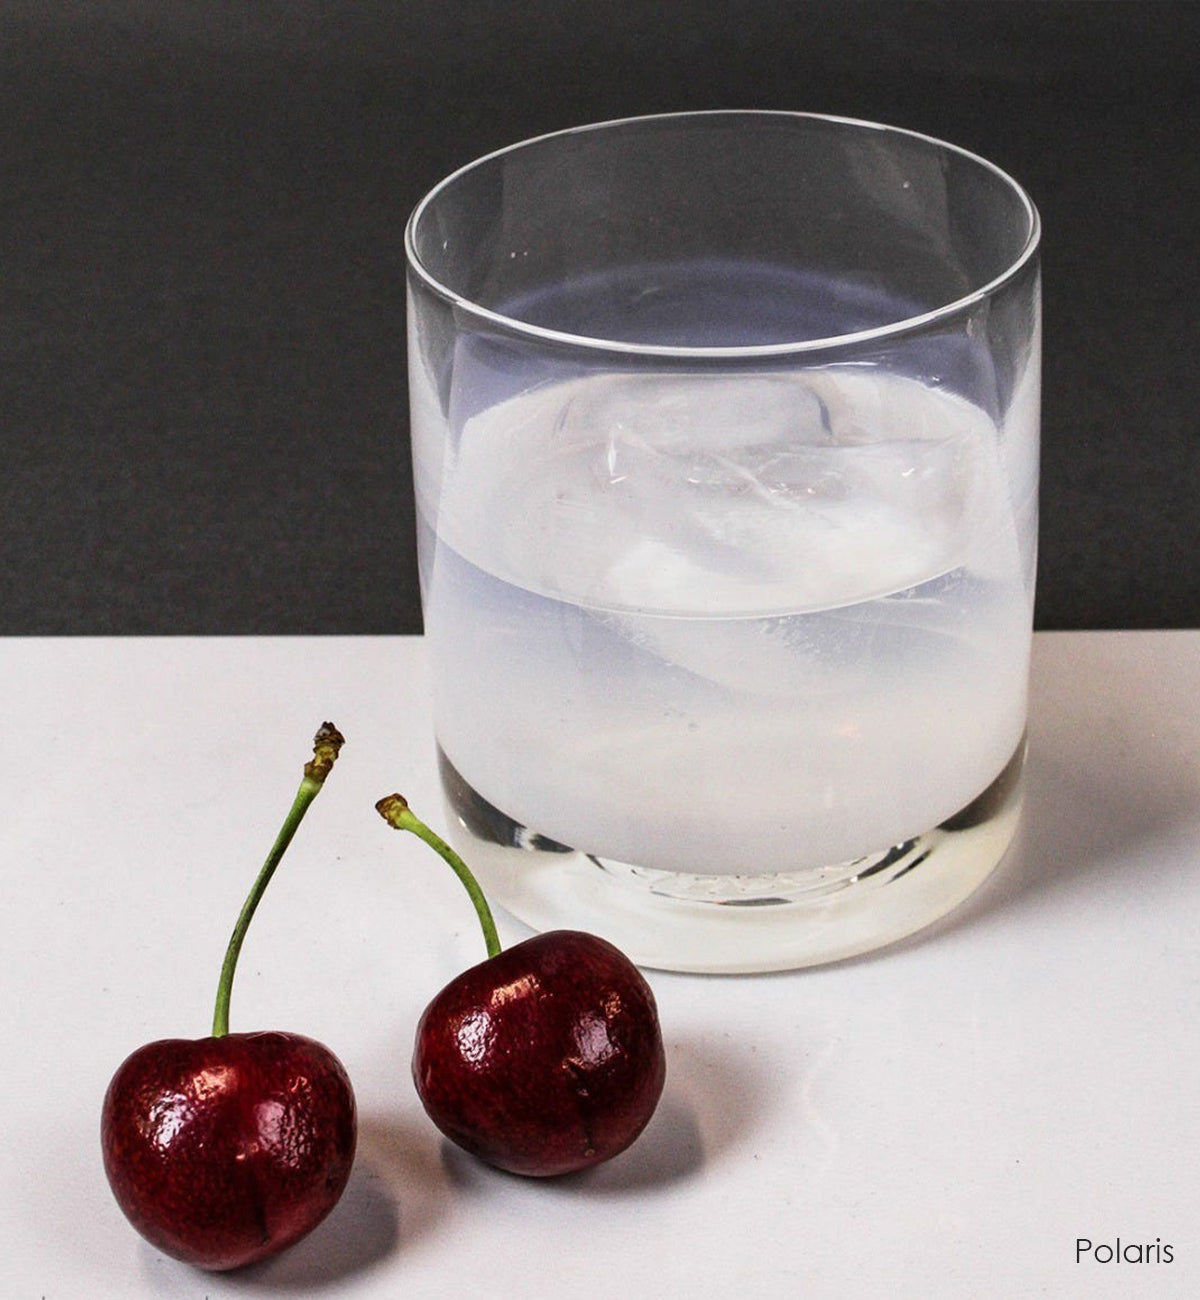 Polaris rocker, white hand-blown glass lowball drinking glass with liquid and ice. sitting atop a white surface next to two cherries.